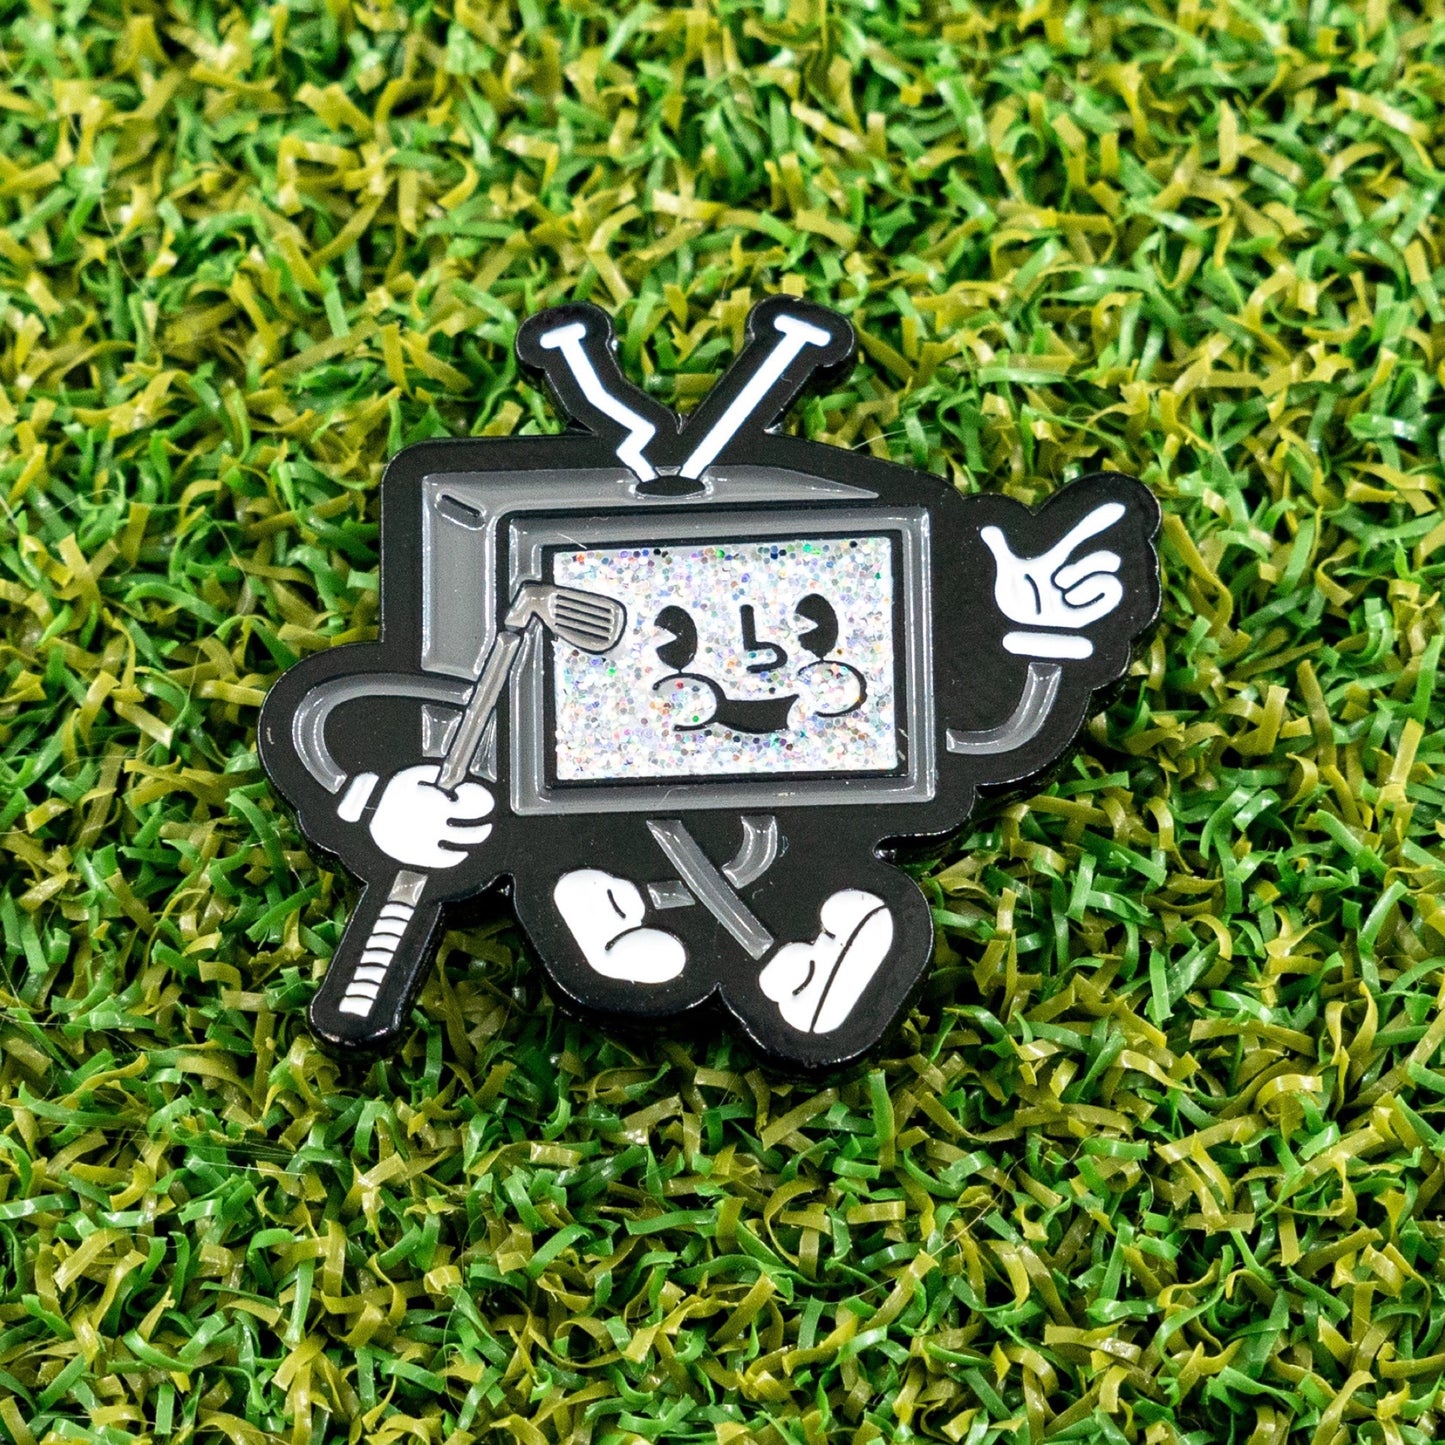 Static retro tv golf ball marker laying on a putting green